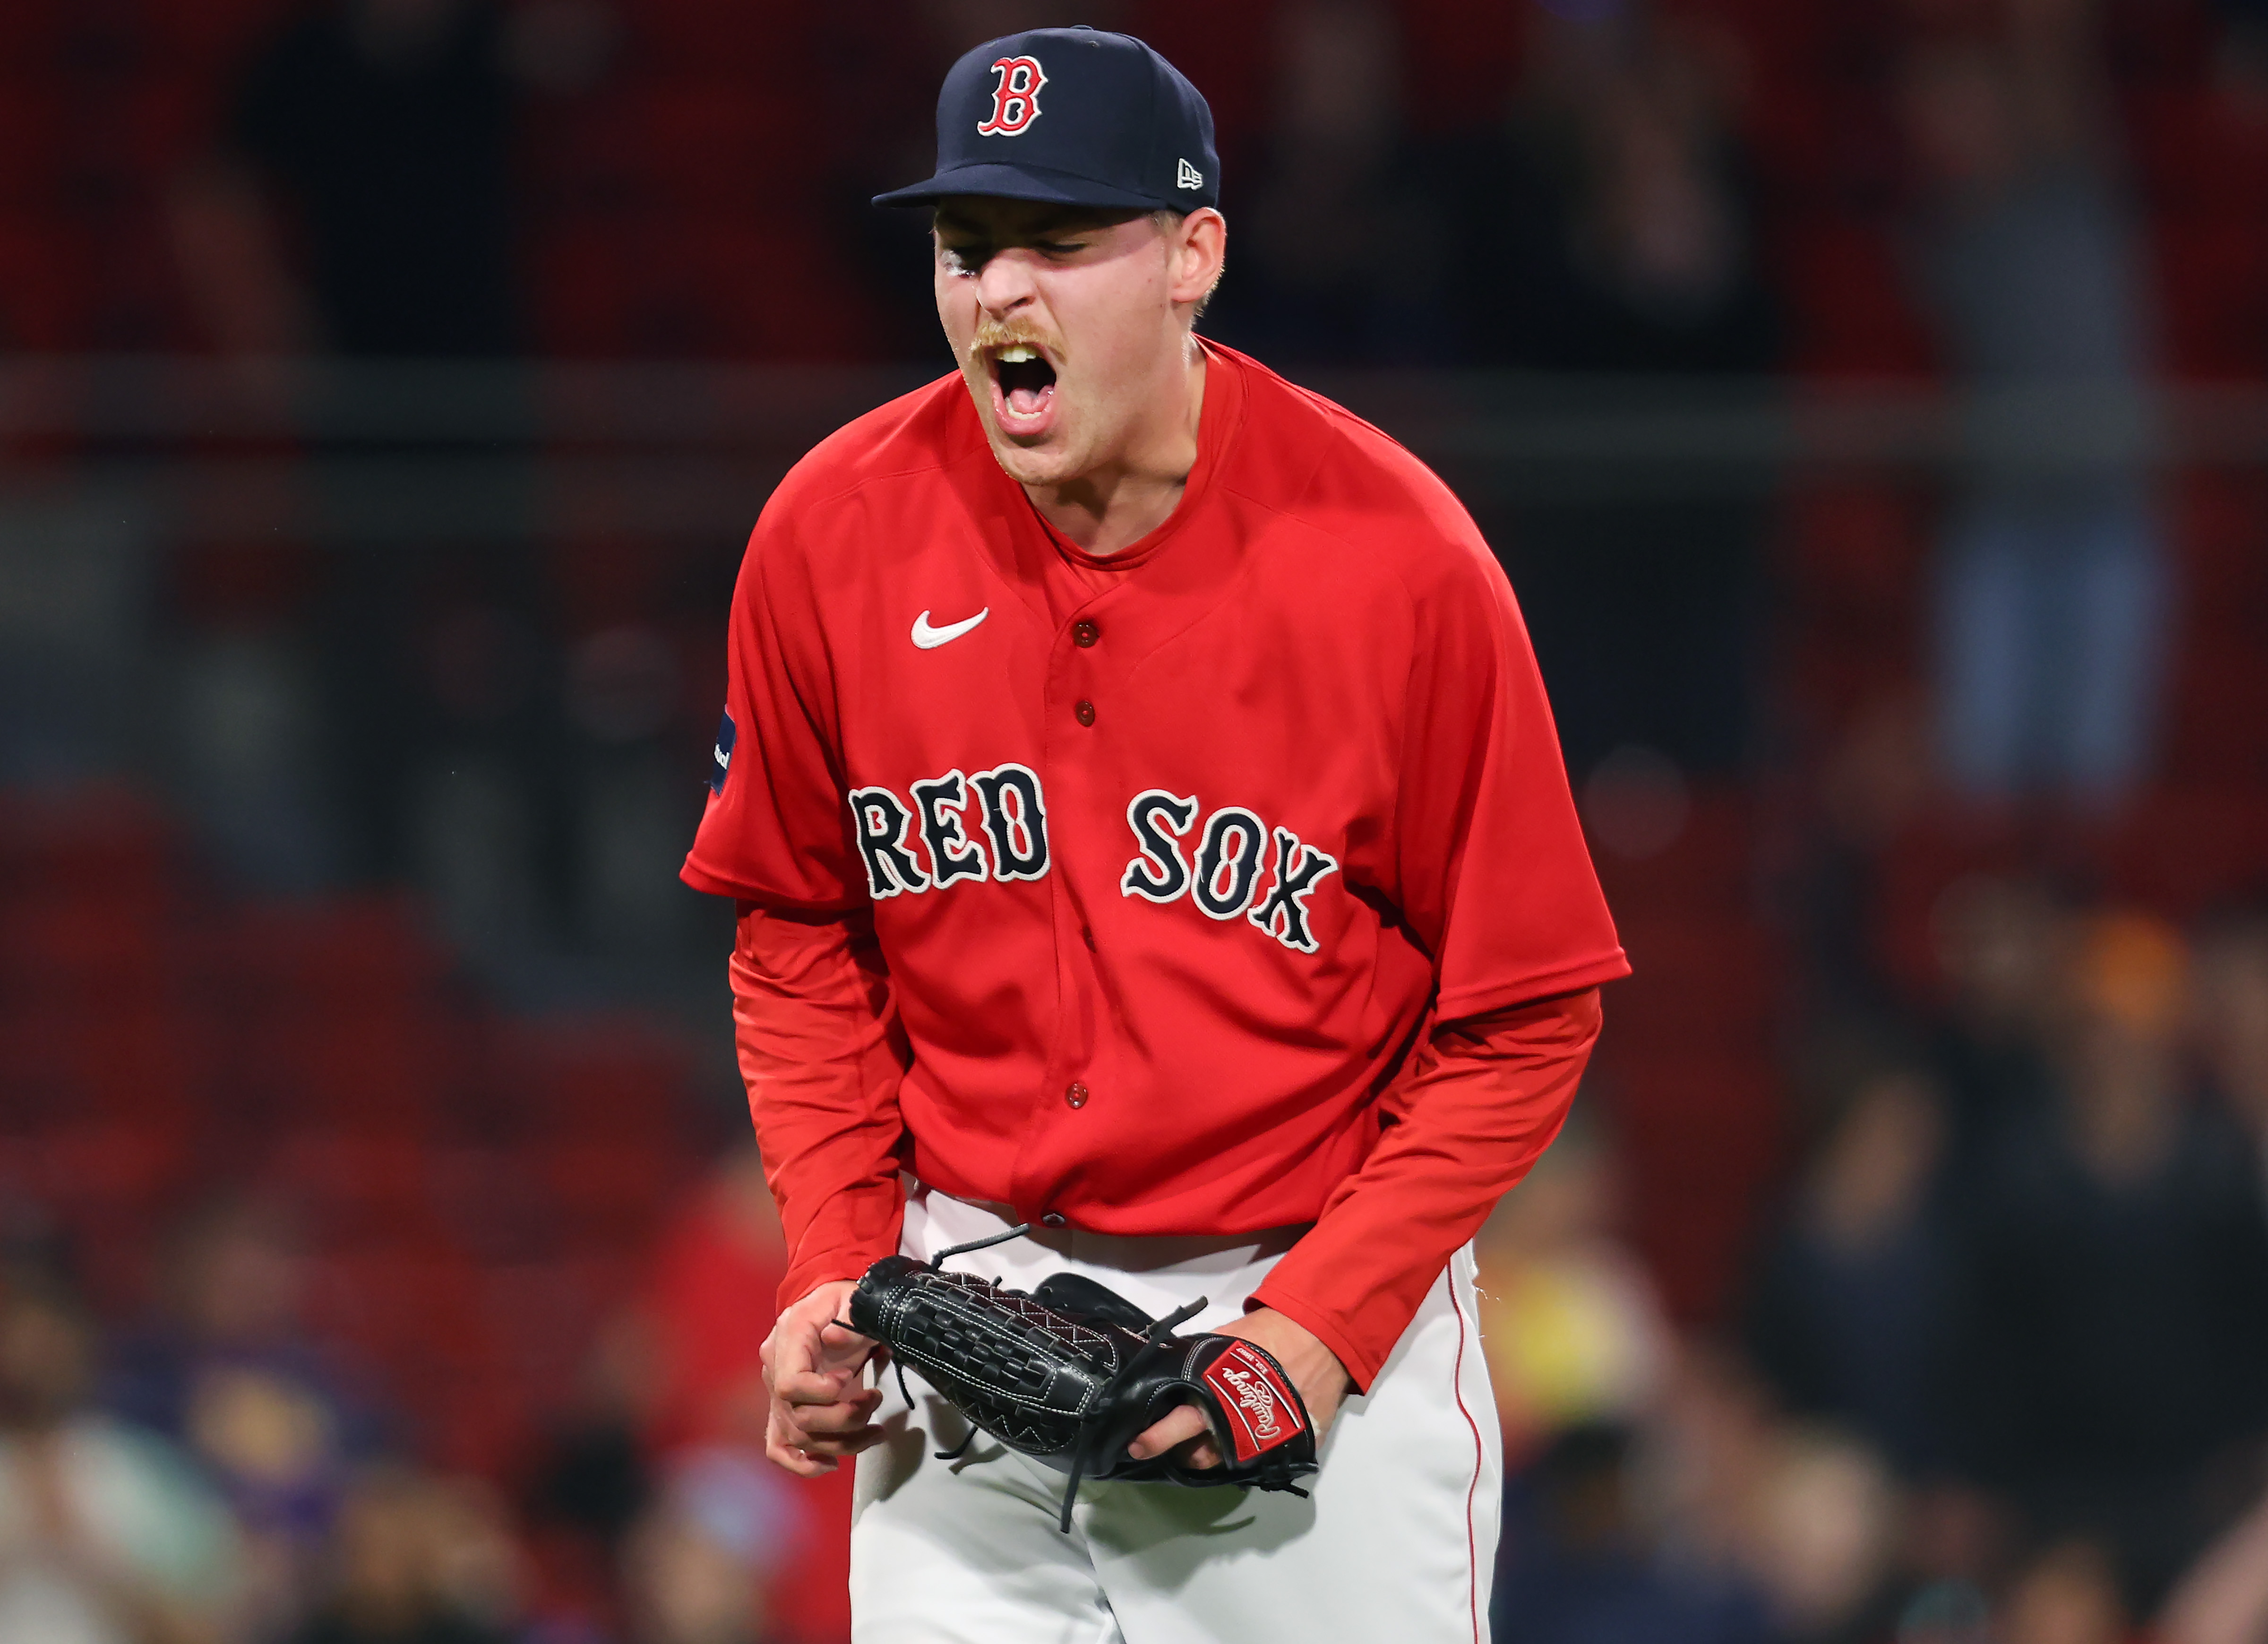 They've made it harder than necessary, but Red Sox can finish Yankees